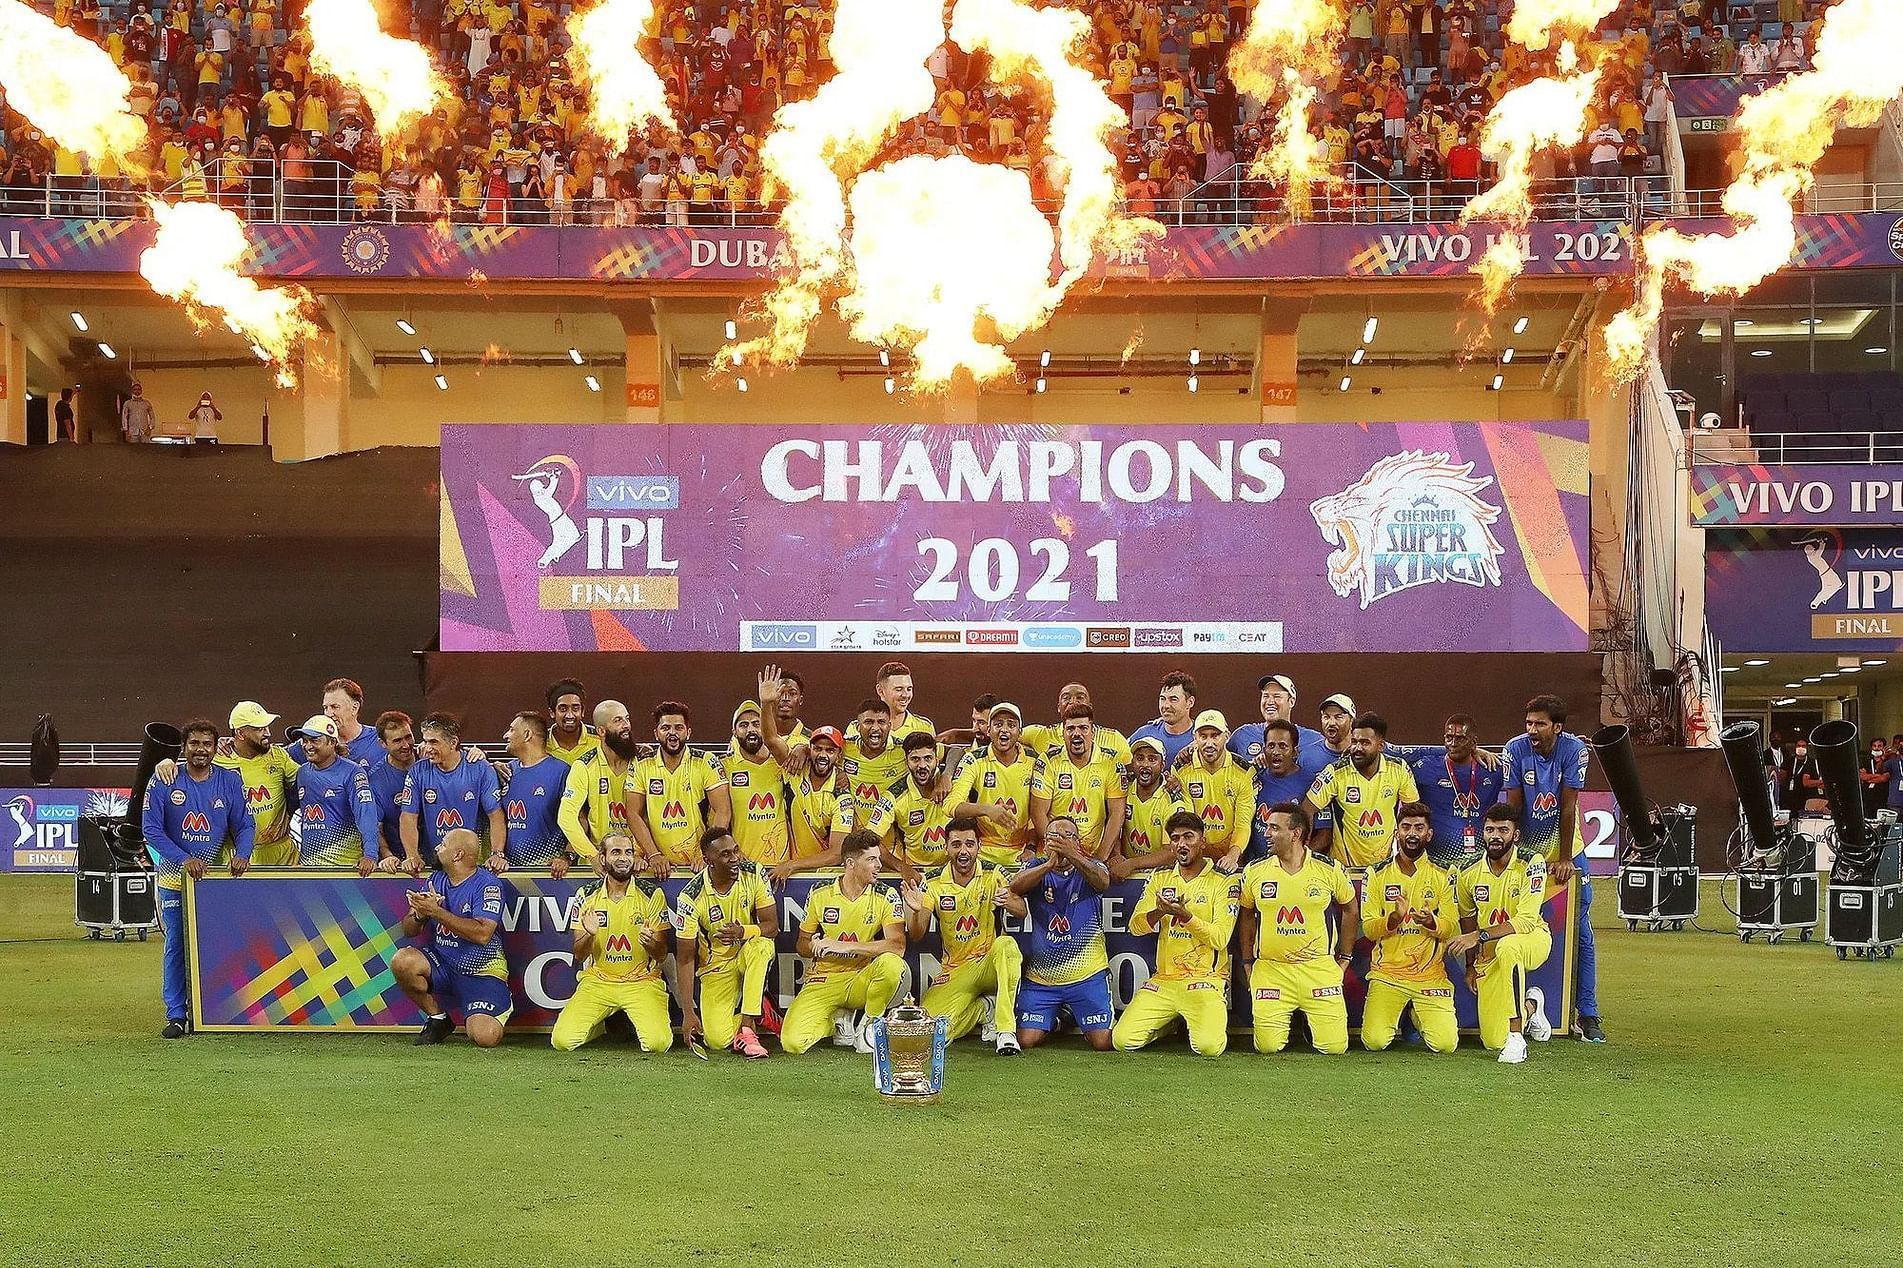 Chennai Super Kings are the defending champions in IPL 2022